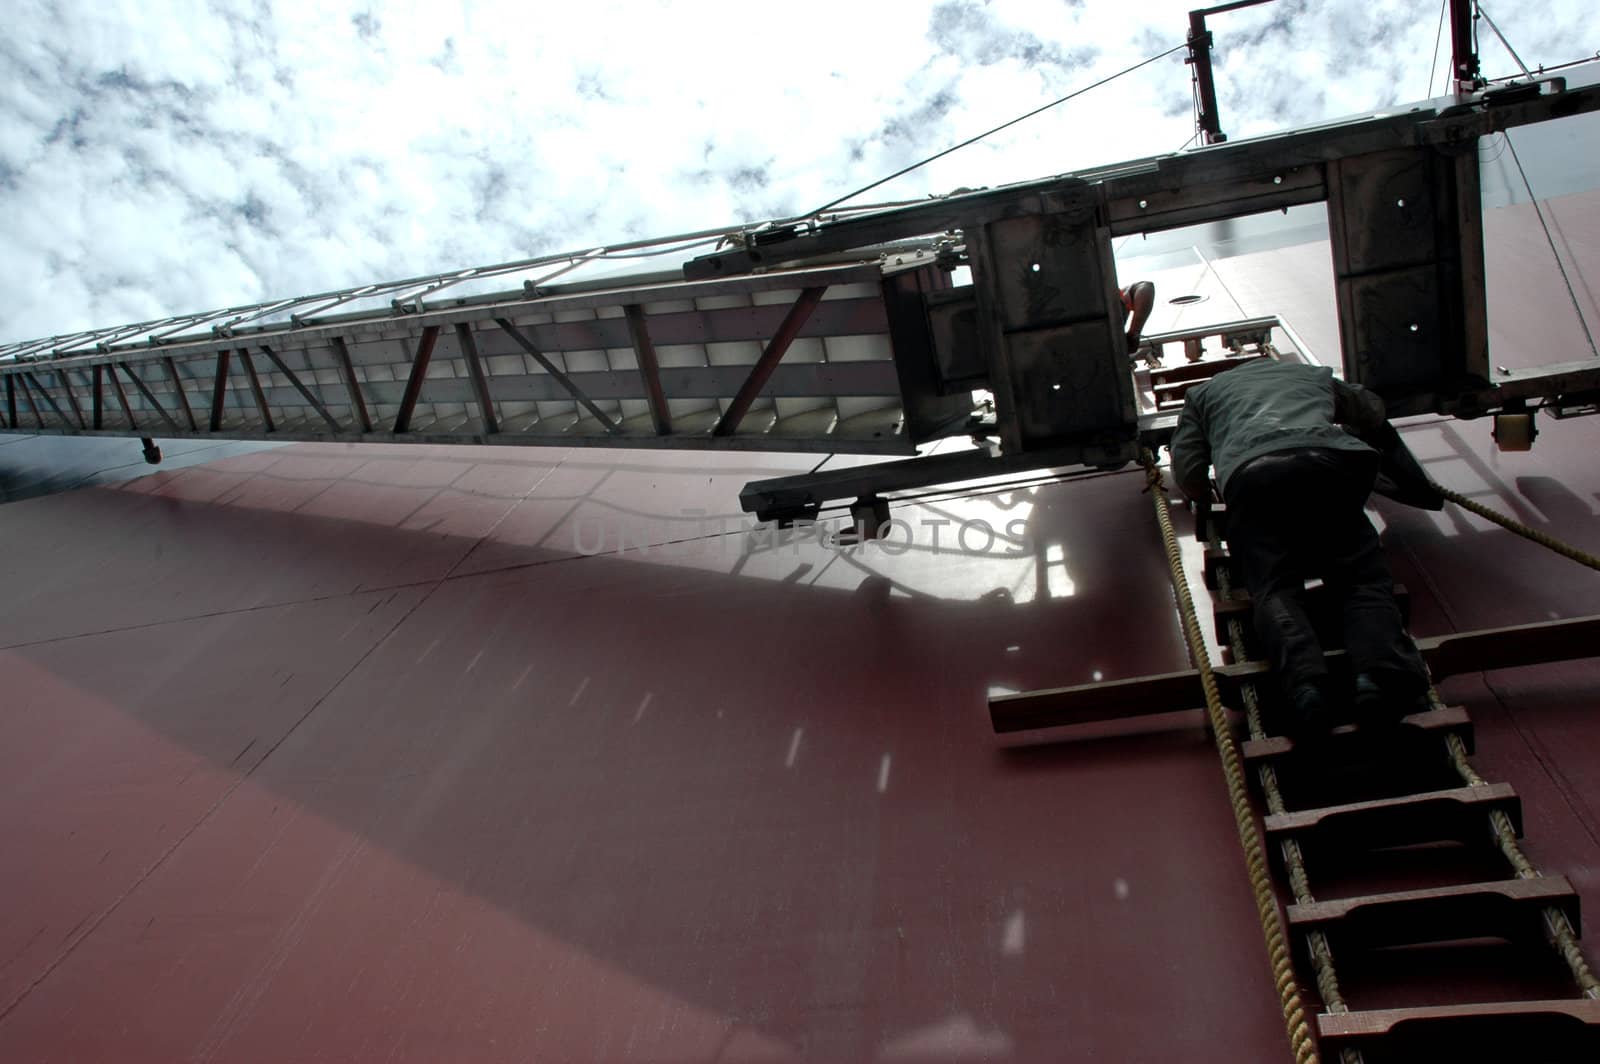 a man climbing a ladder on a tanker by antonihalim